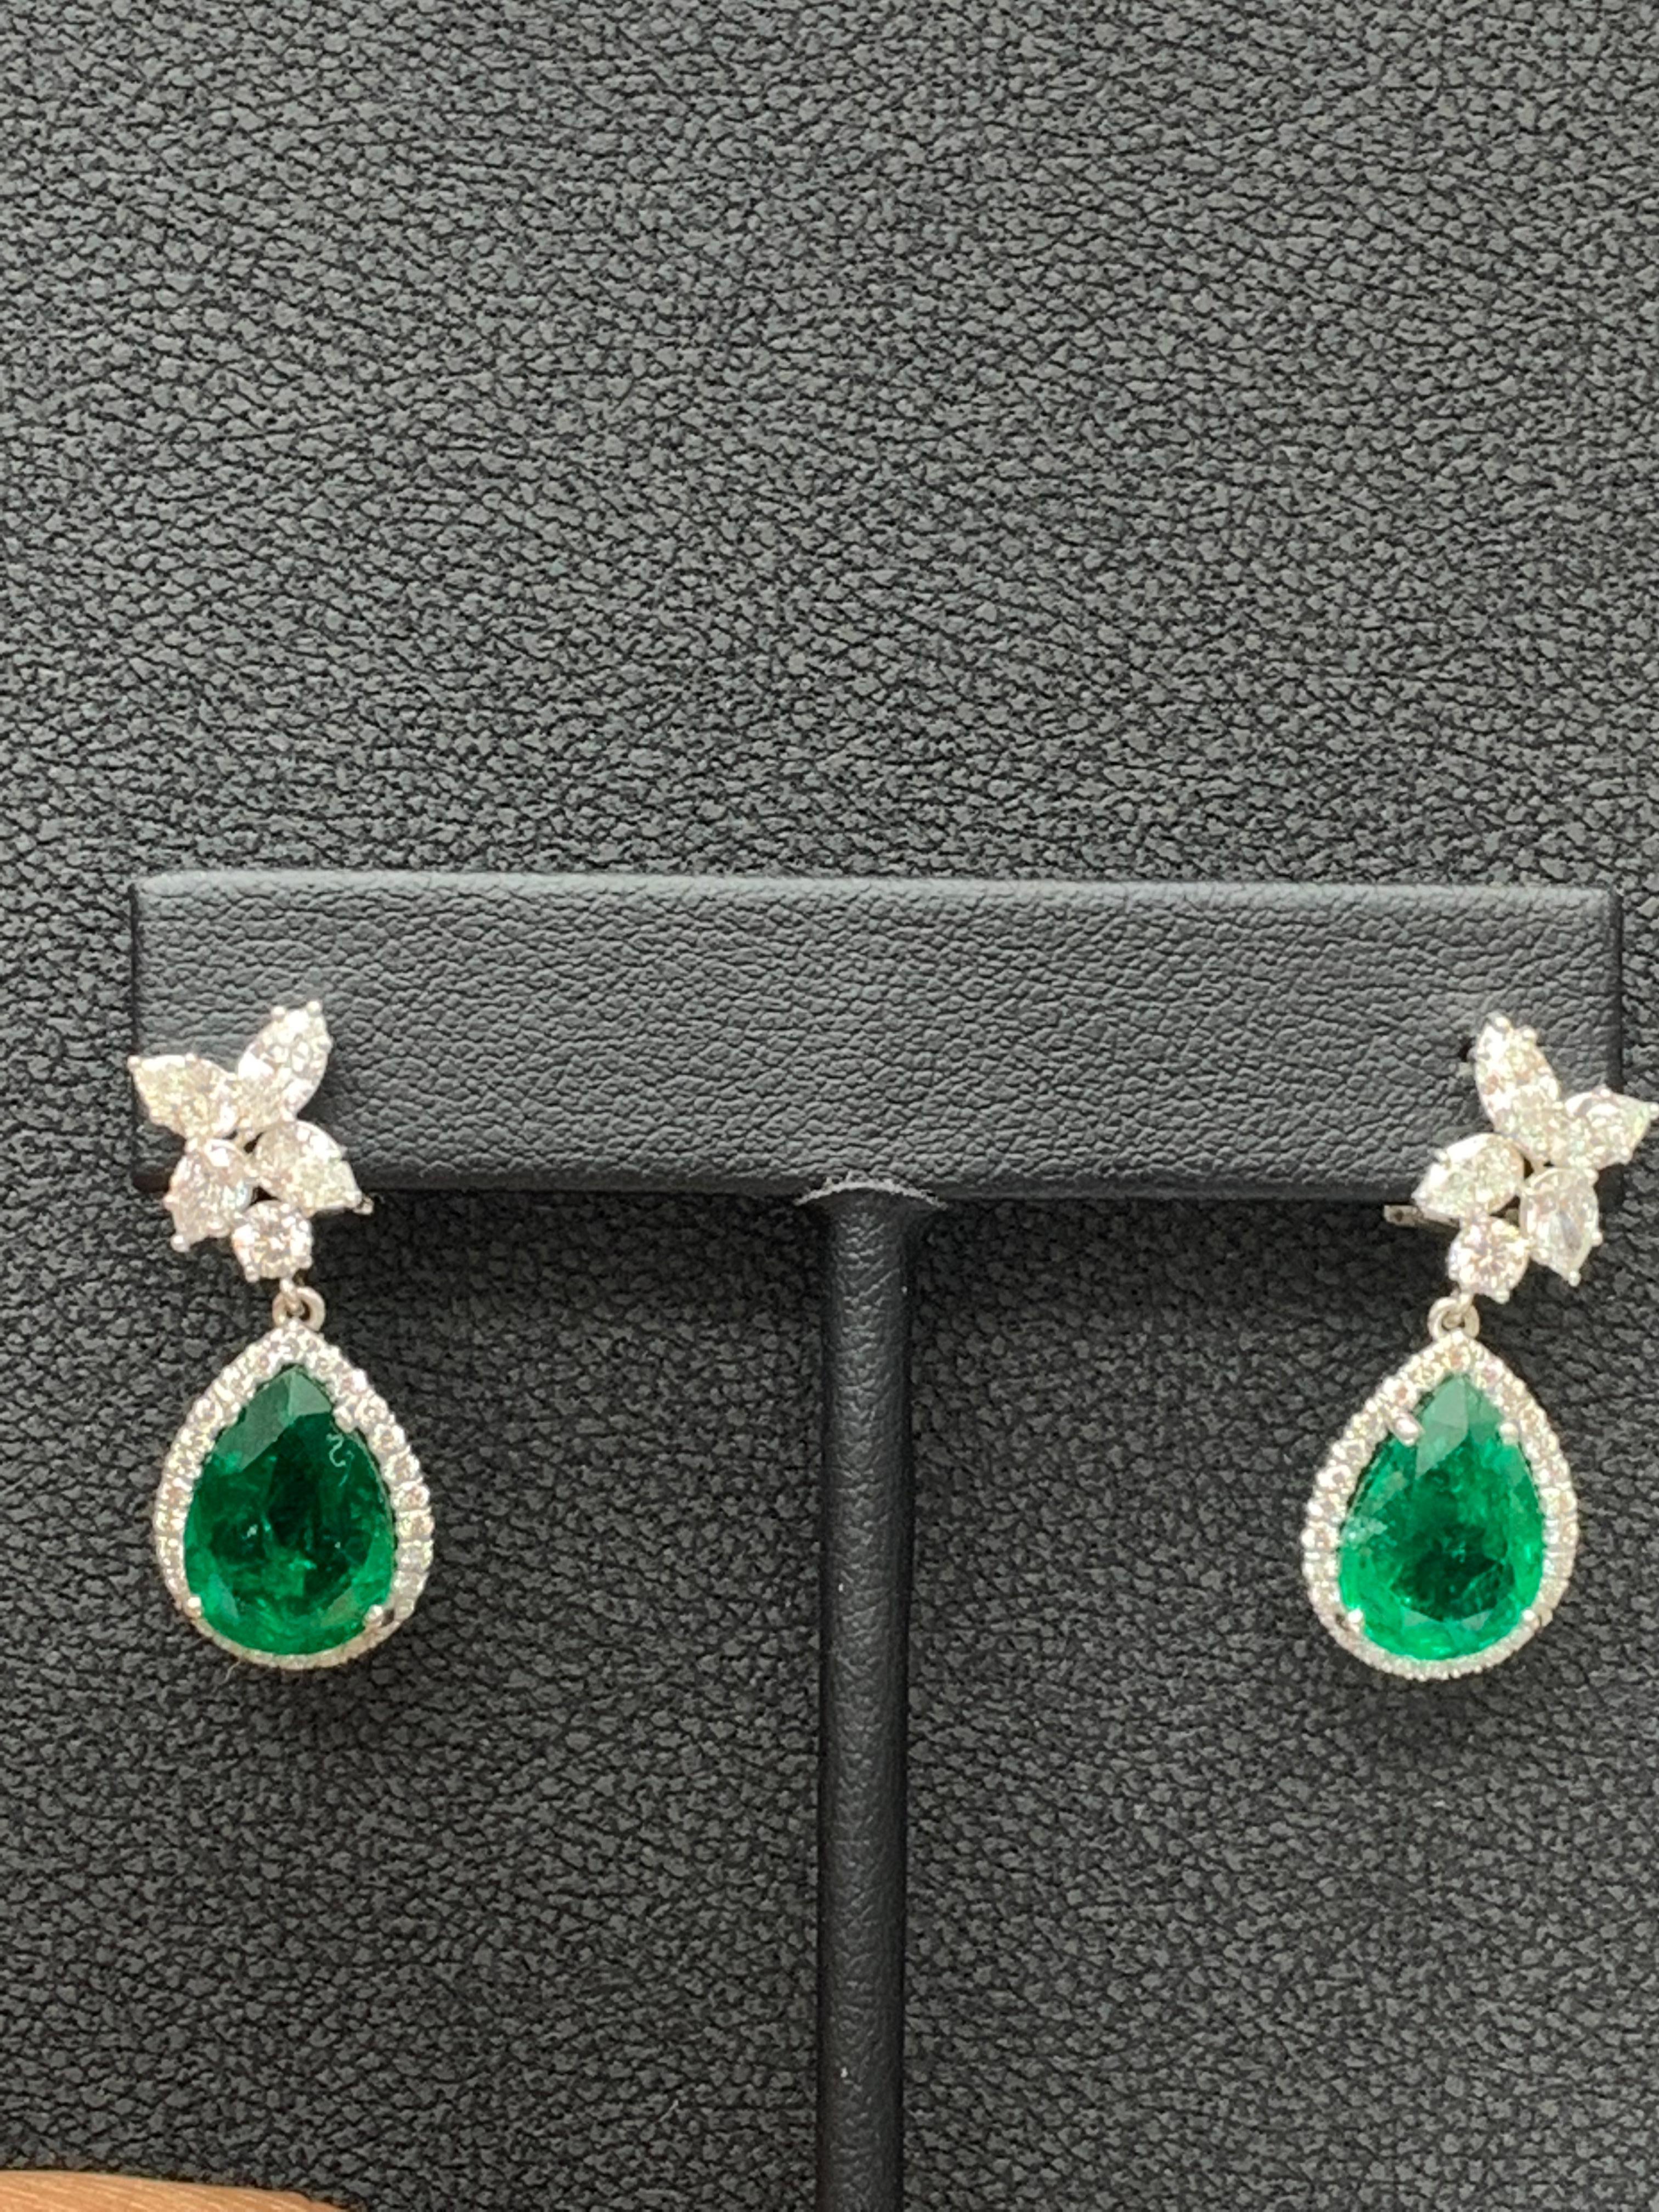 A beautiful and chic pair of drop earrings showcasing a cluster of brilliant mixed-cut diamonds, and pear shape Emerald set in an intricate and stylish design. 8 Mixed cut Diamonds weigh 1.61 carats in total.   2 Emeralds weigh 8.92 carats in total.